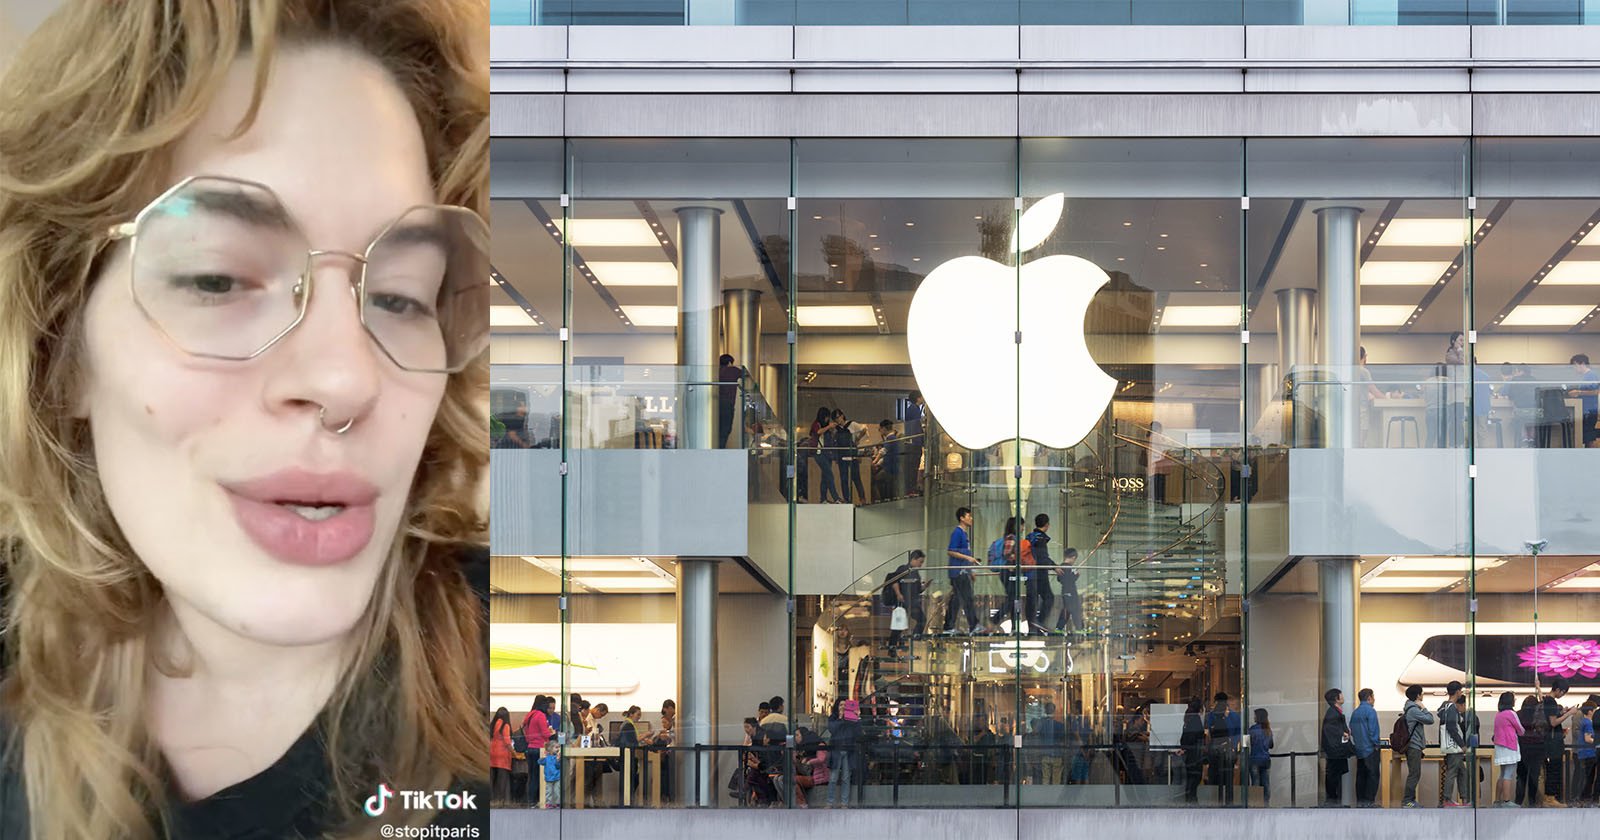 Apple Employee Says She Could Be Fired for Video on iPhone Security